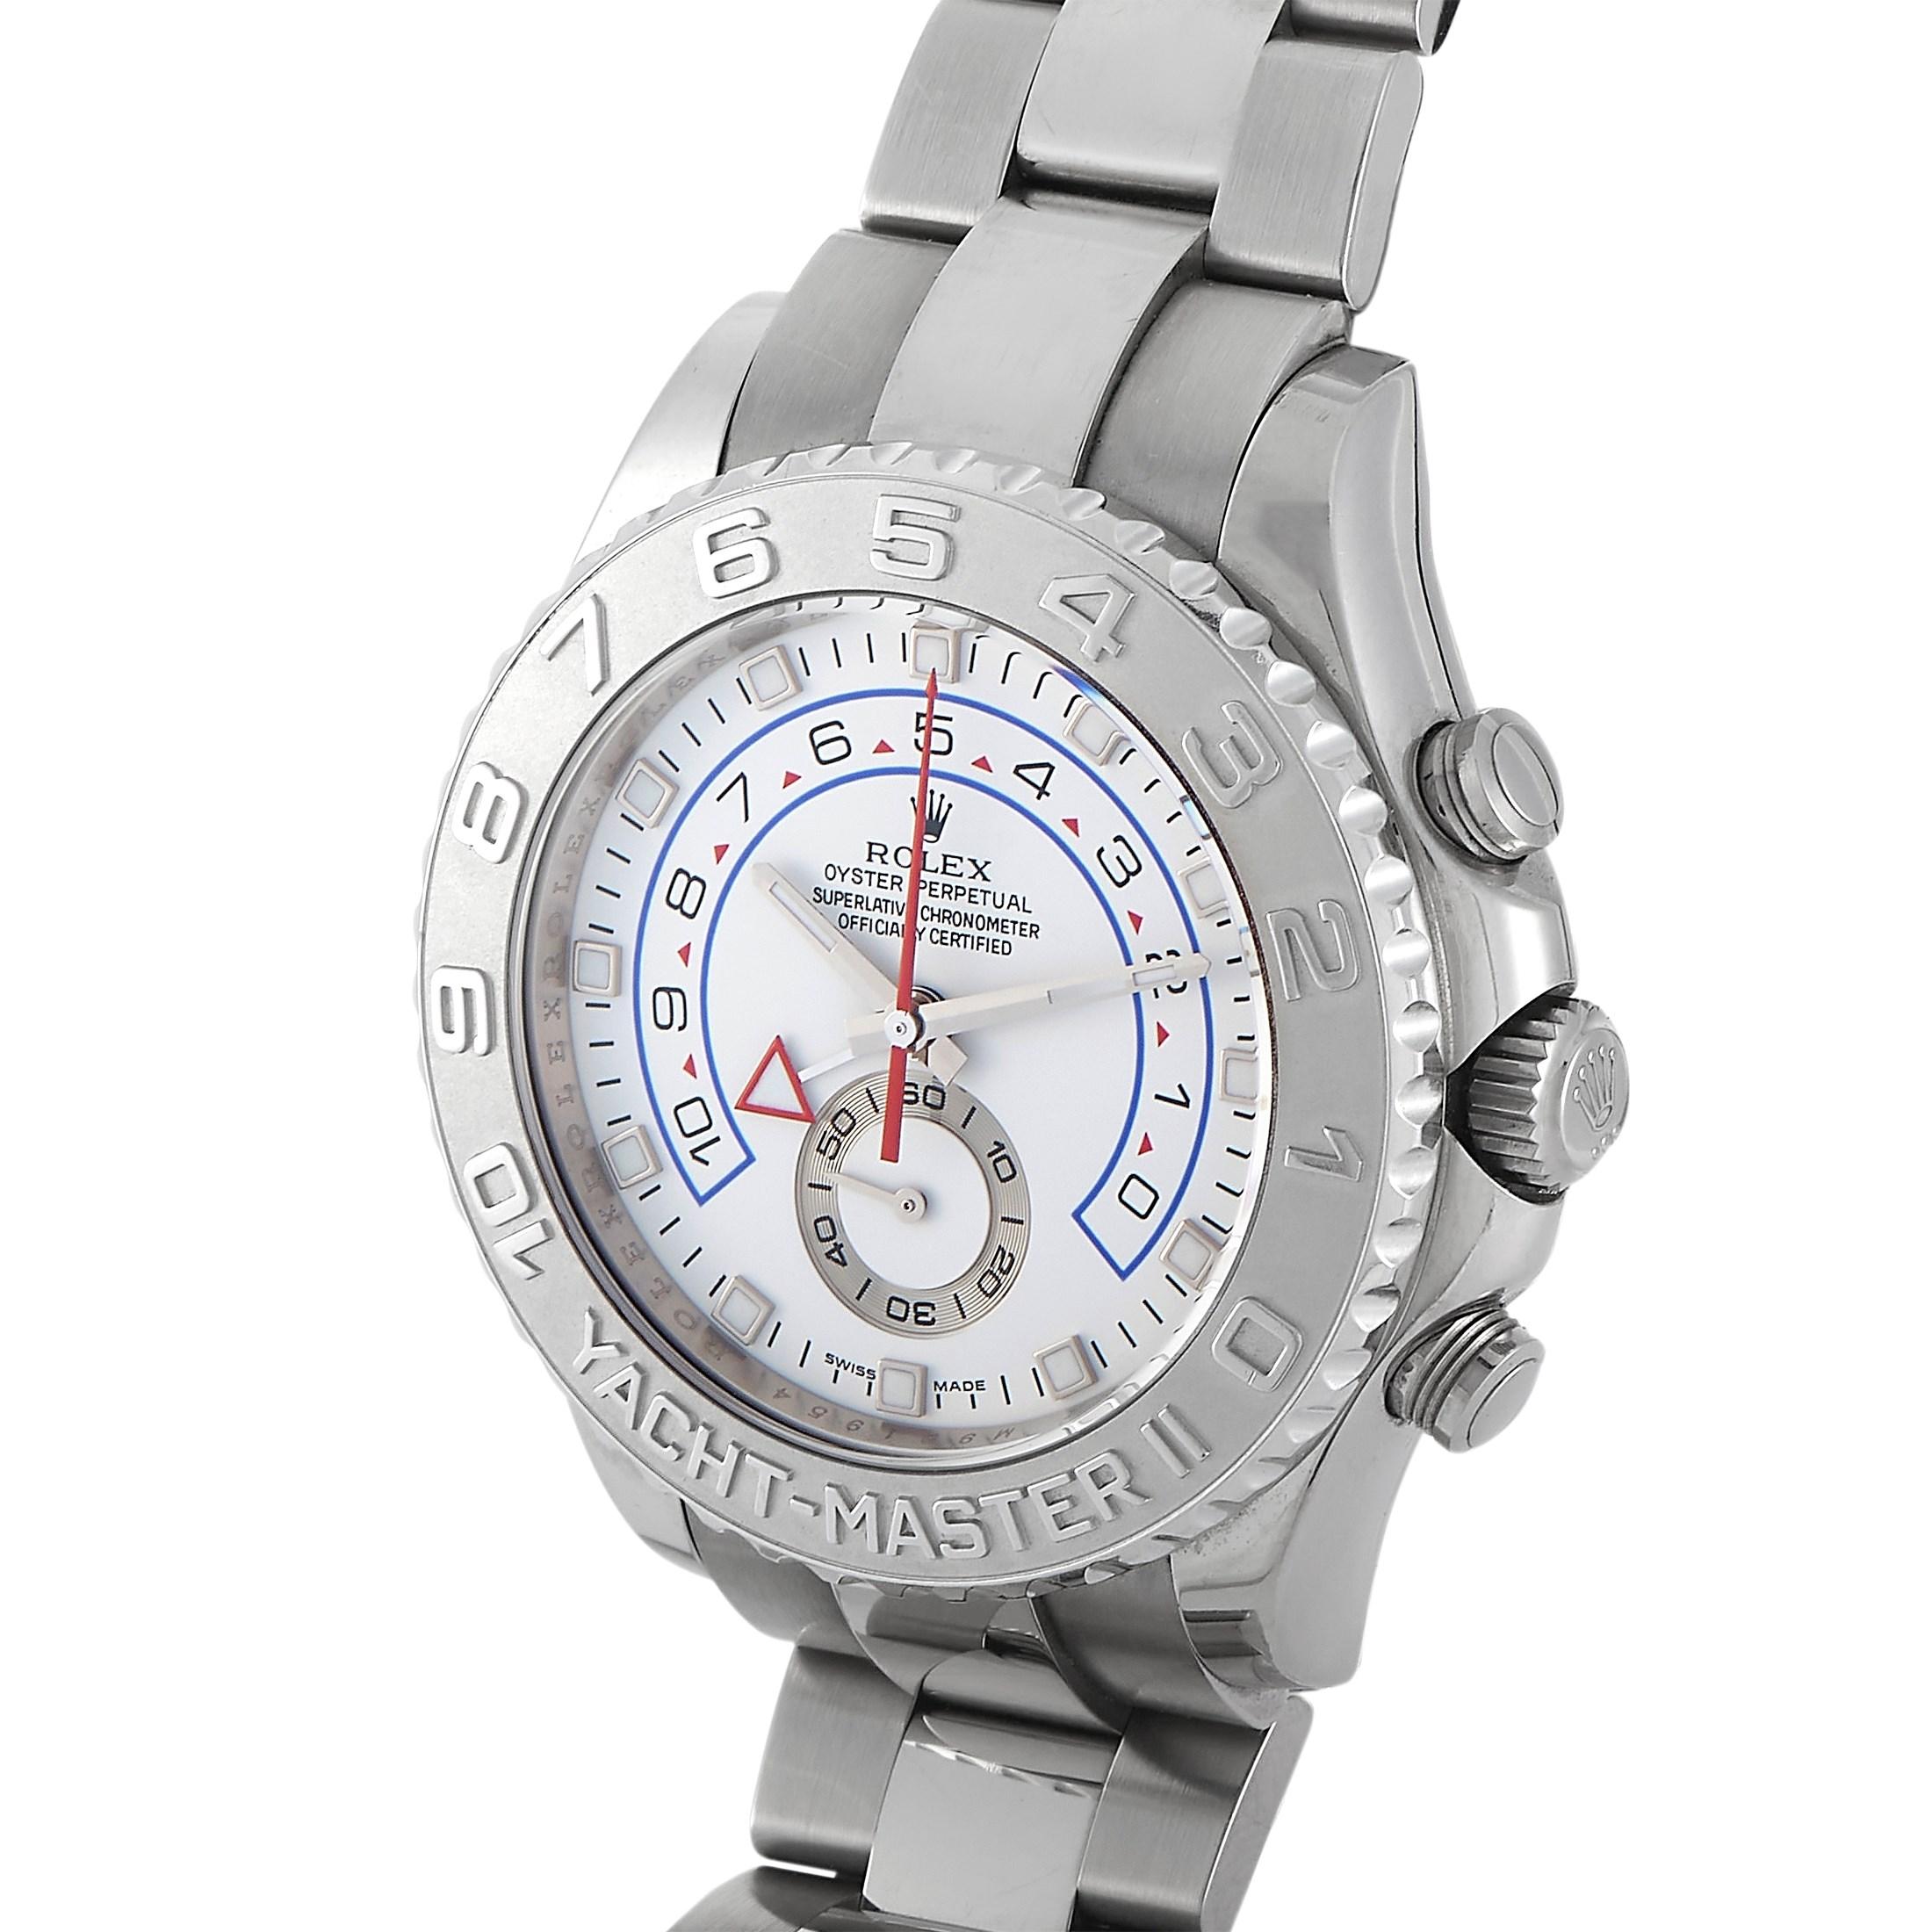 This watch is encased in an 18k white gold bezel and features a bidirectional rotatable platinum bezel. Its white dial has a triangular hour marker at the twelve o’clock position, while a luminescent disc clearly distinguishes the hour hand from the